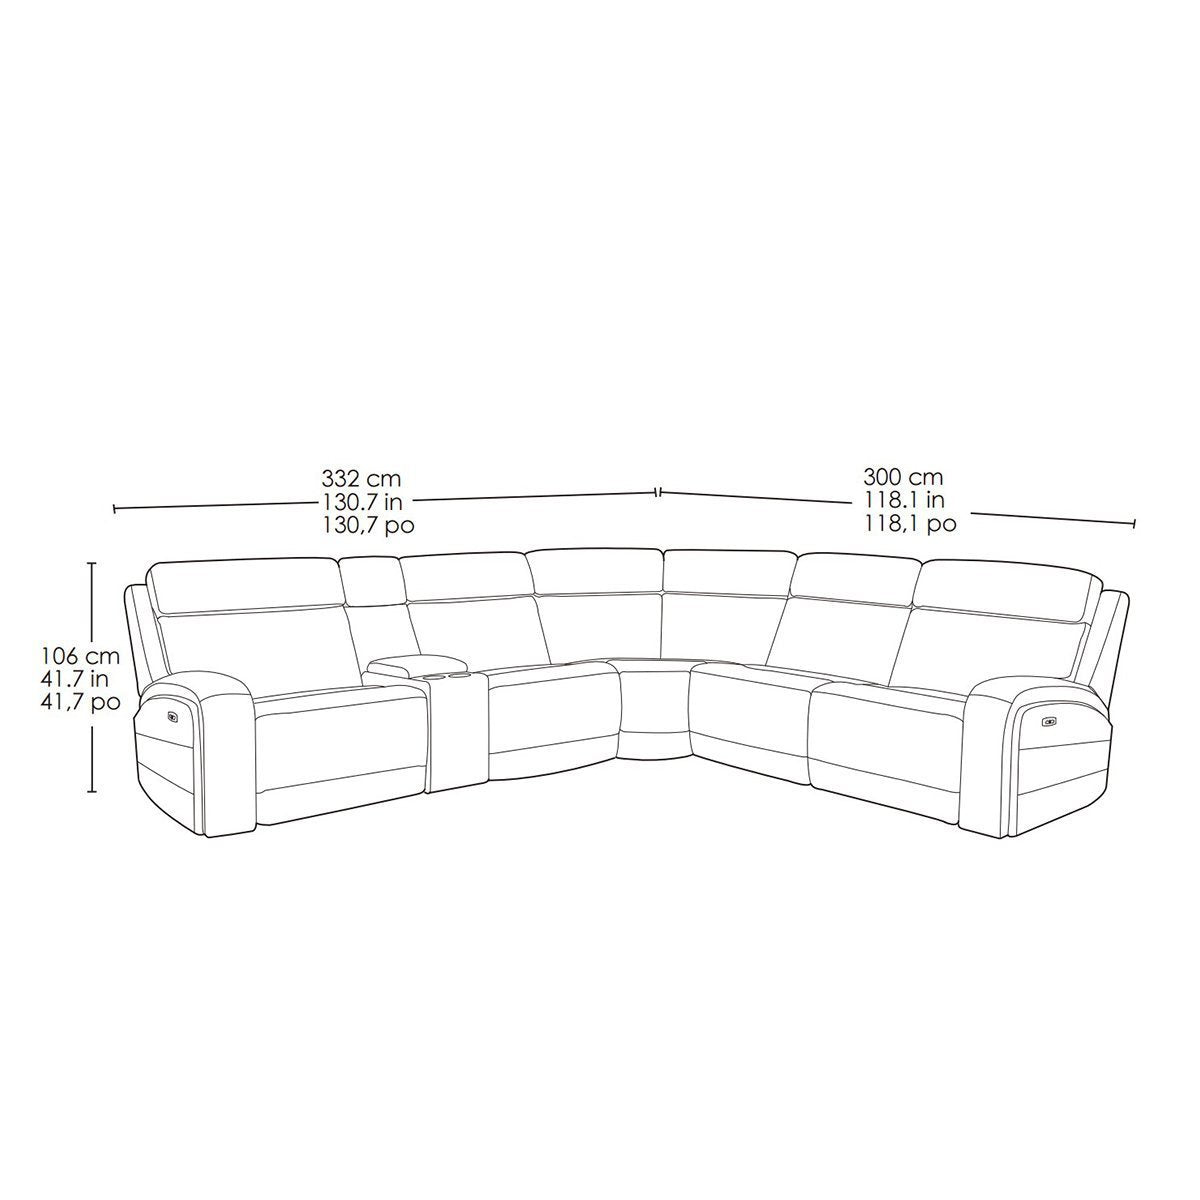 Kuka Paisley Leather Reclining Sectional Sofa with Power Headrests - Signature Retail Stores